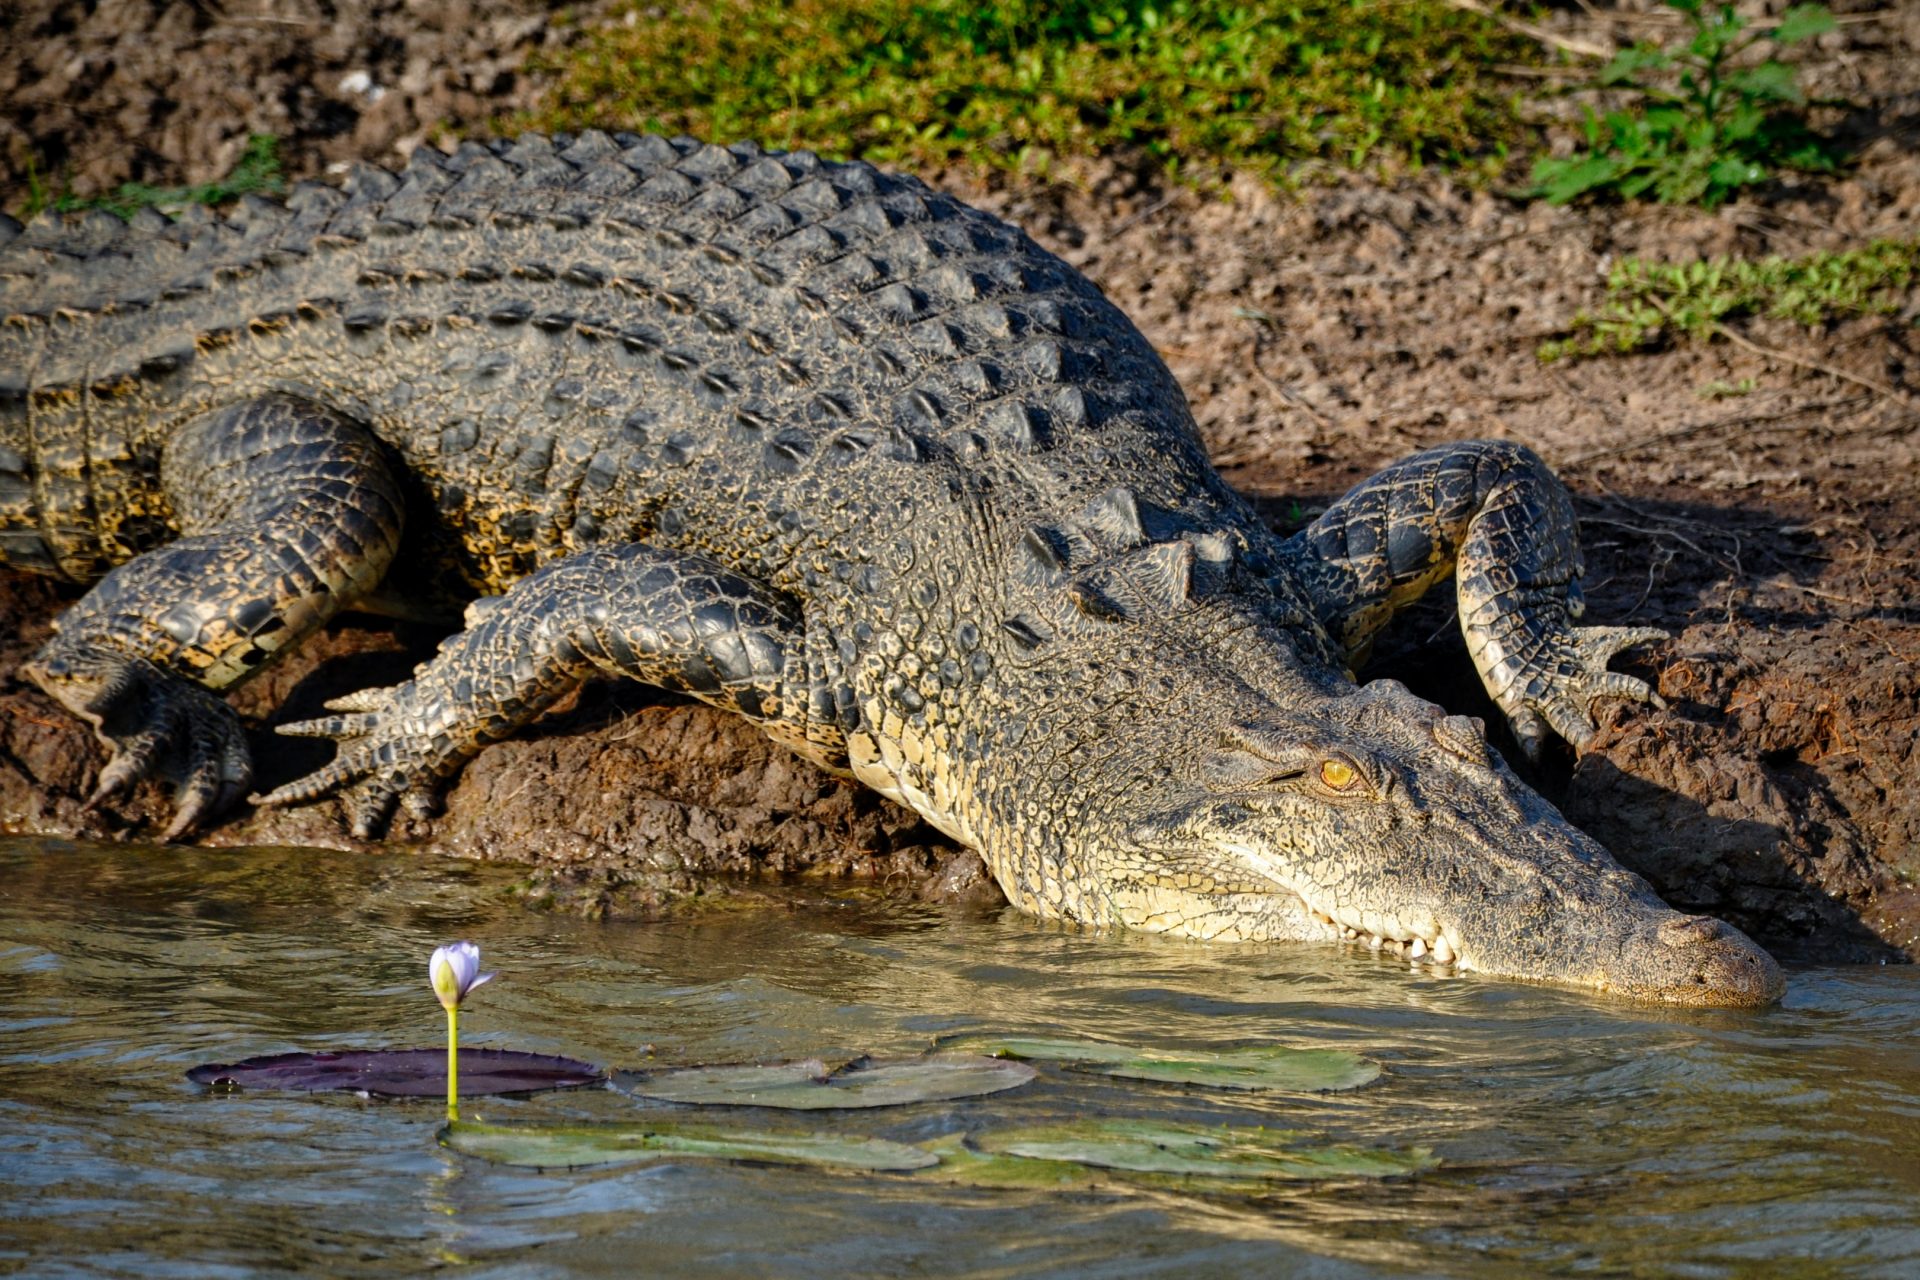 Some crocodiles may have acted out of parental concern